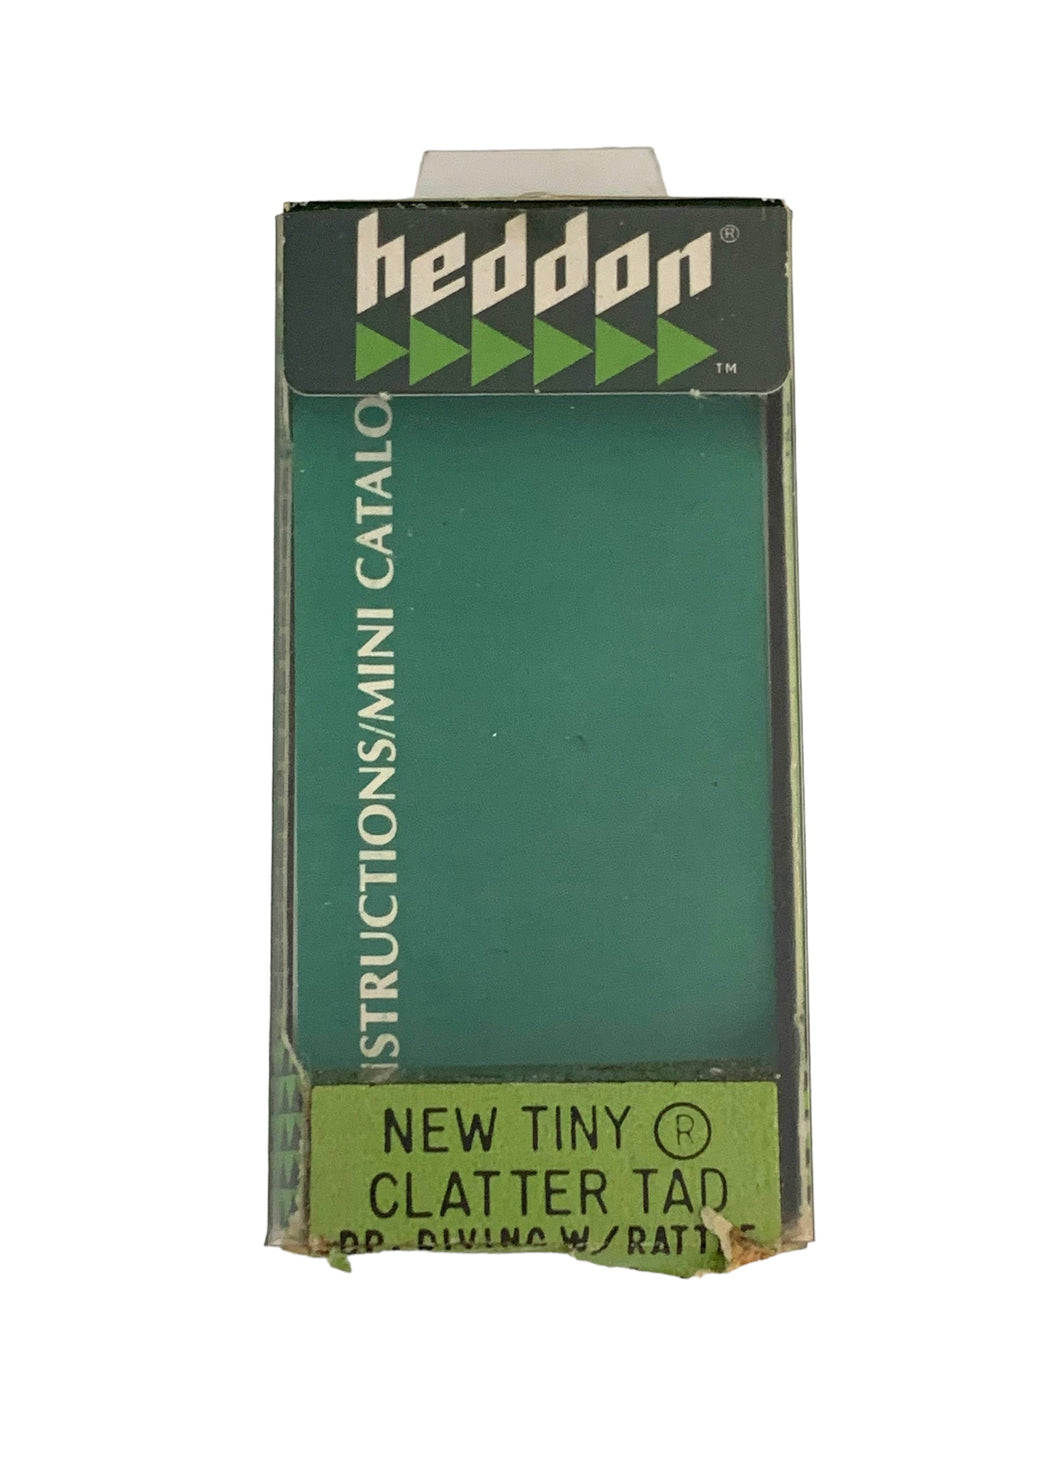 EMPTY BOX for HEDDON NEW TINY CLATTER TAD TADPOLLY Vintage Fishing Lure • 0990 GRA